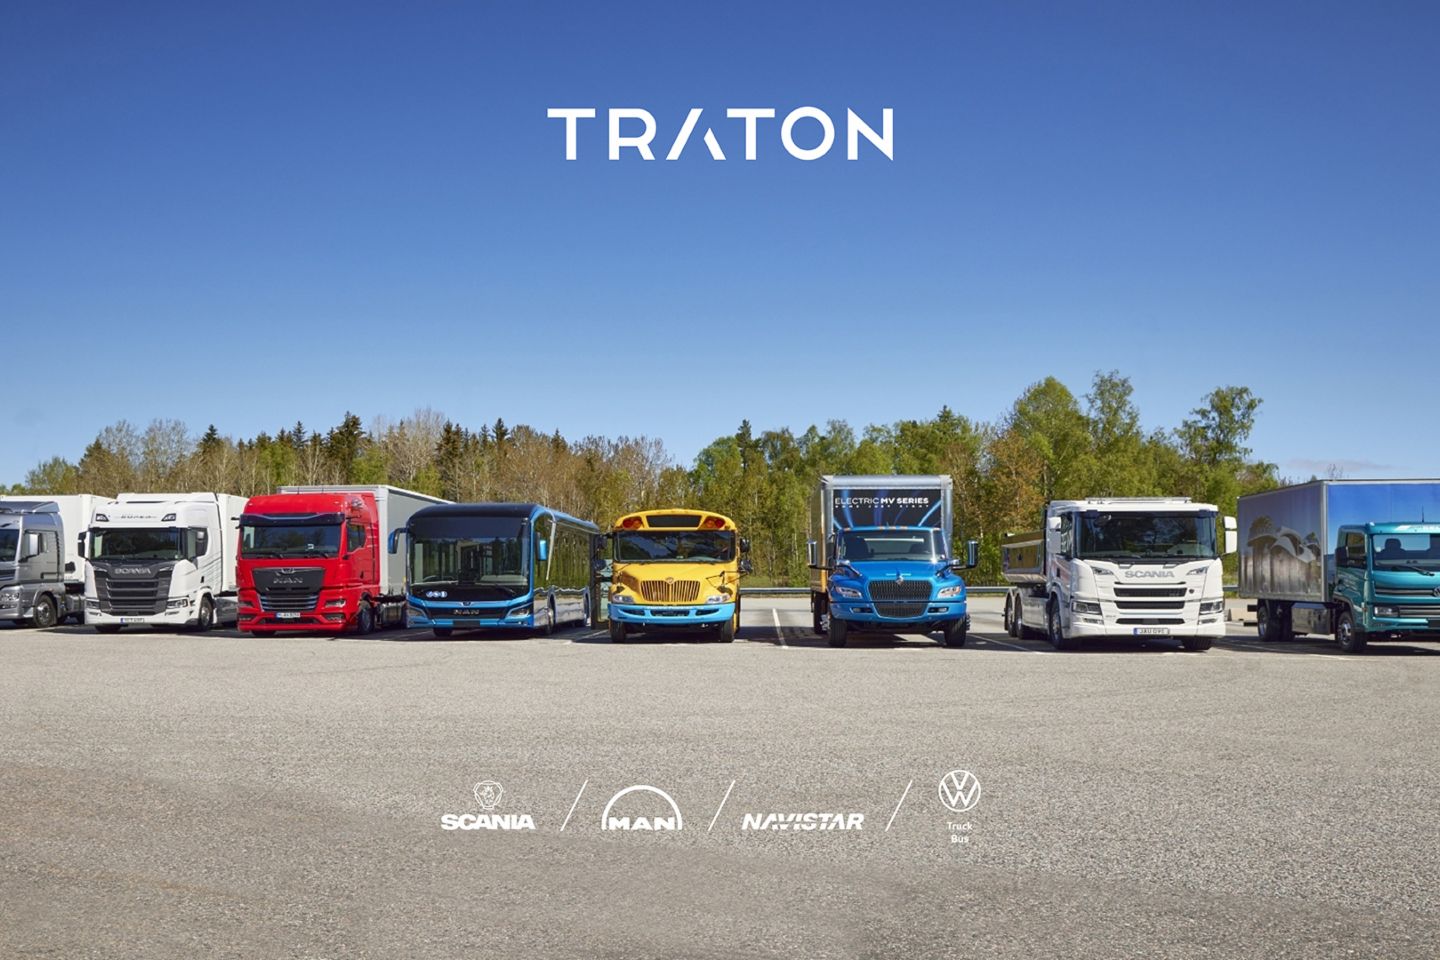 Scania to offer new electric models every year